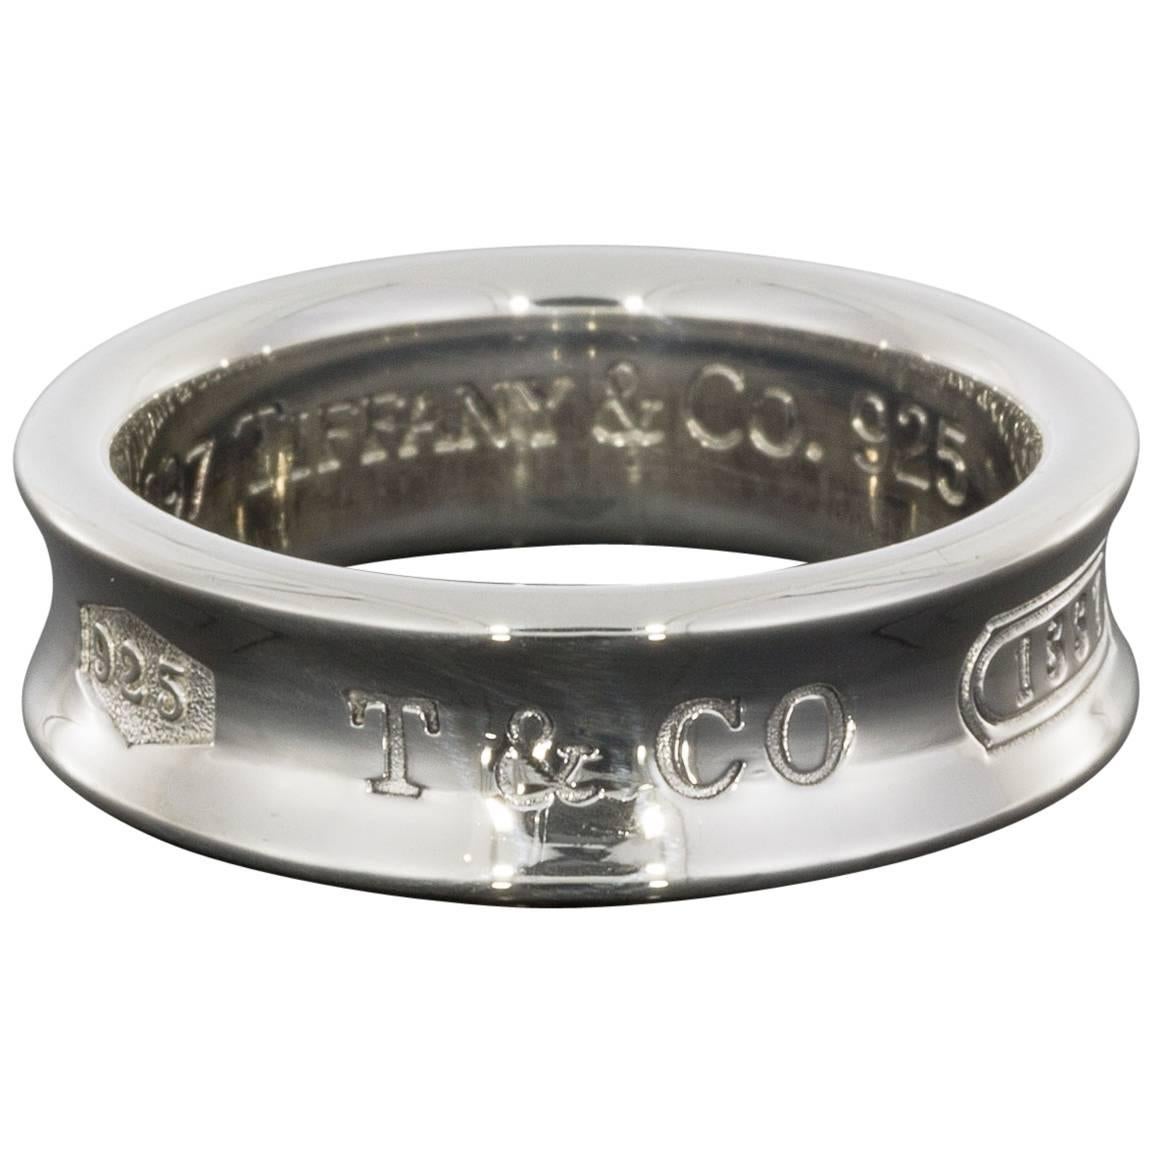 Tiffany & Co. Sterling Silver Men’s Engraved Wedding Band